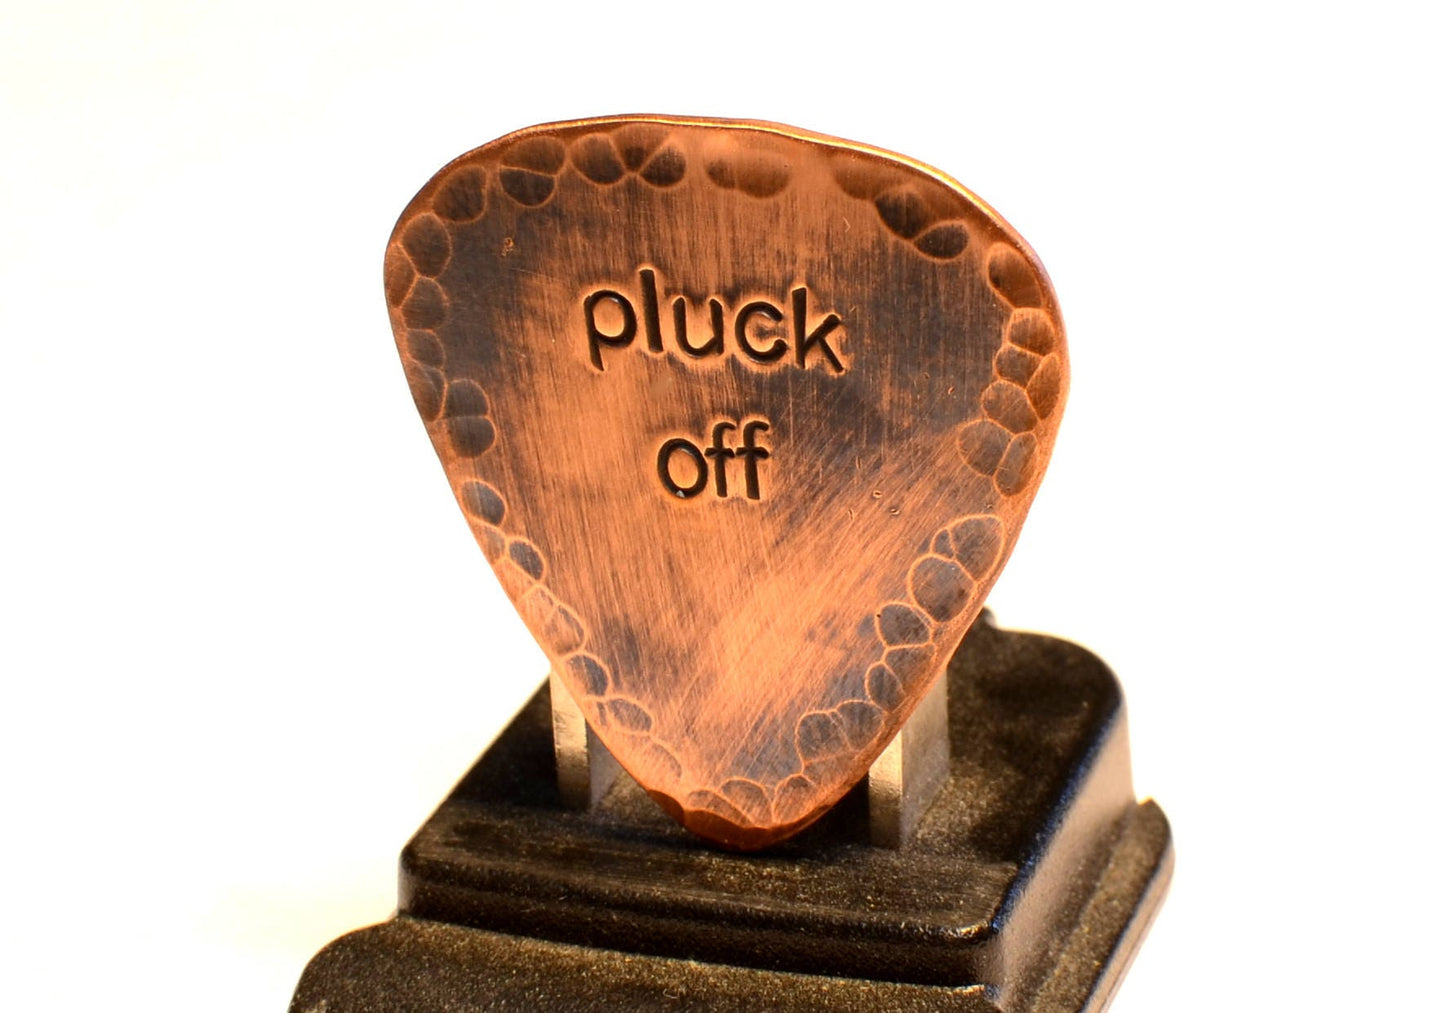 Copper Guitar Pick with Pluck Off in a Rustic Patina and Hammered Finish